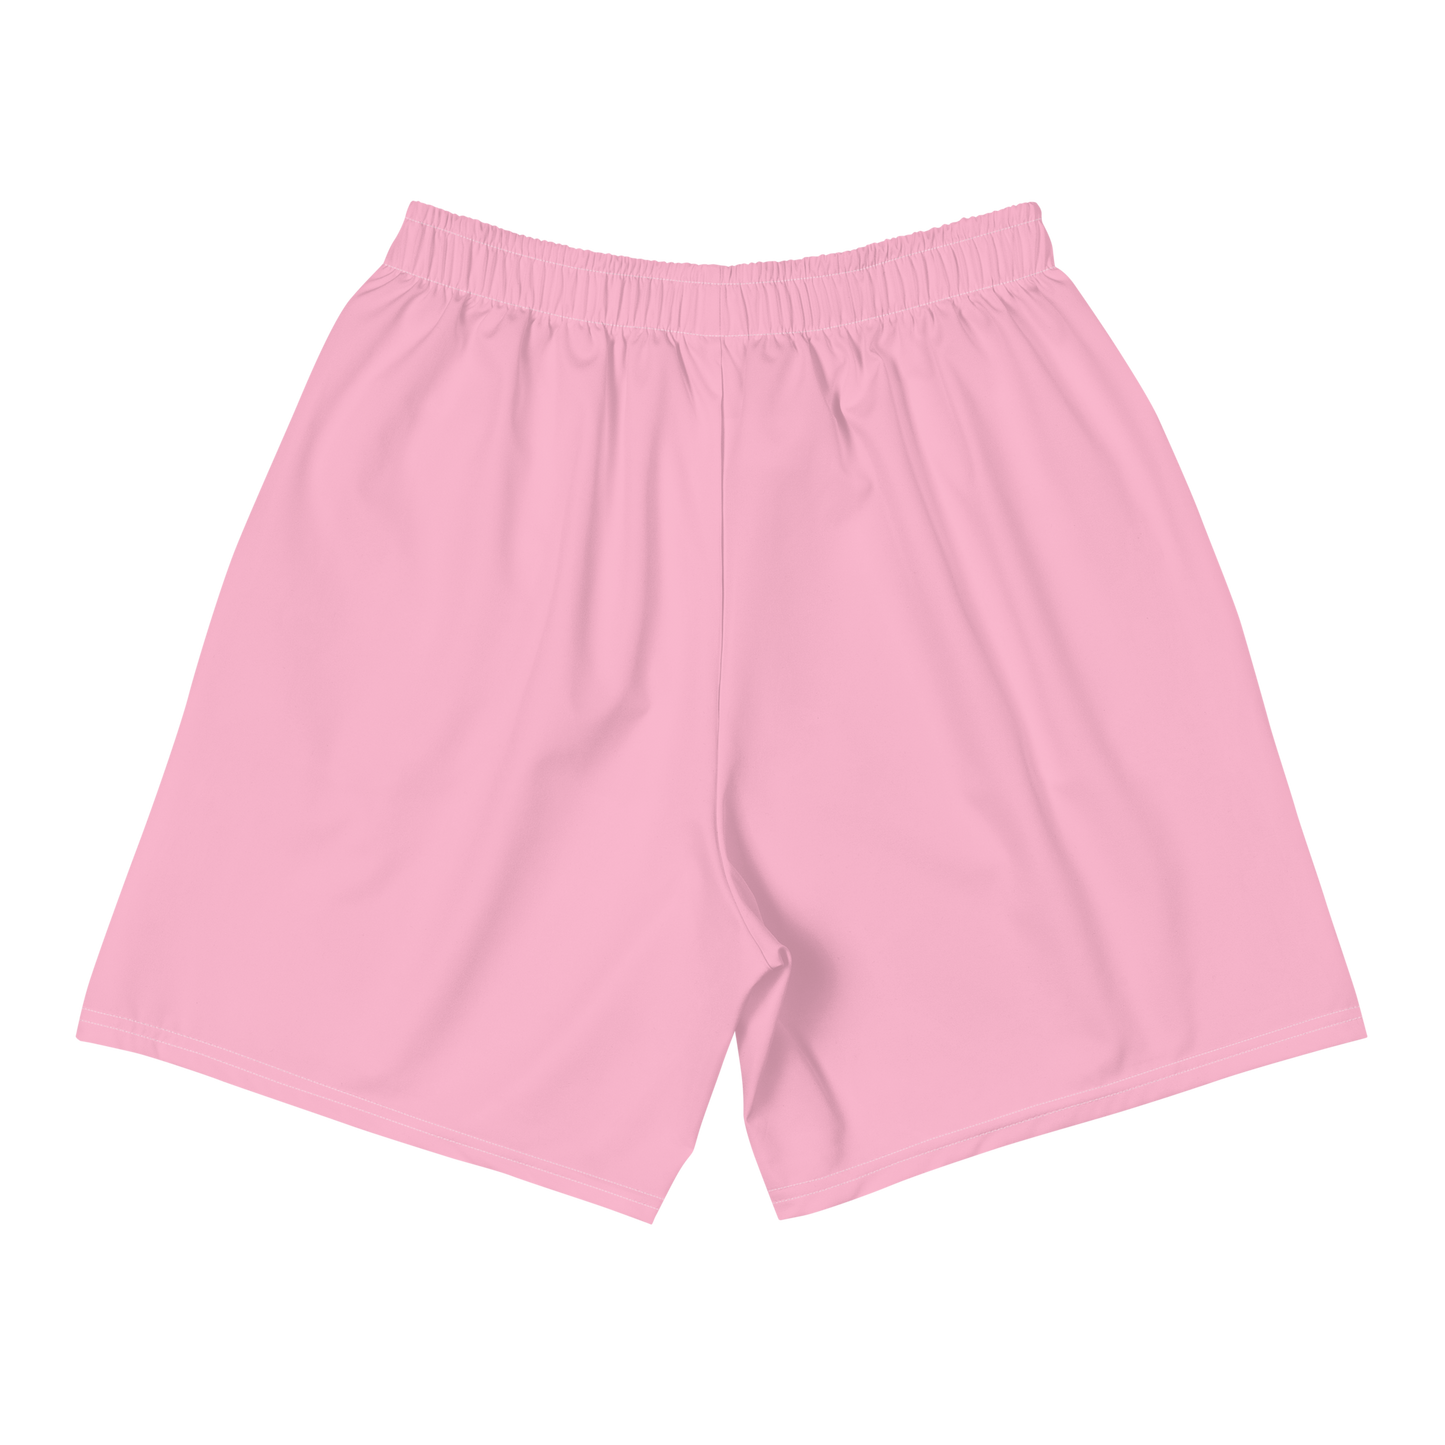 DWMD 'Stained Cotton Candy' Shorts